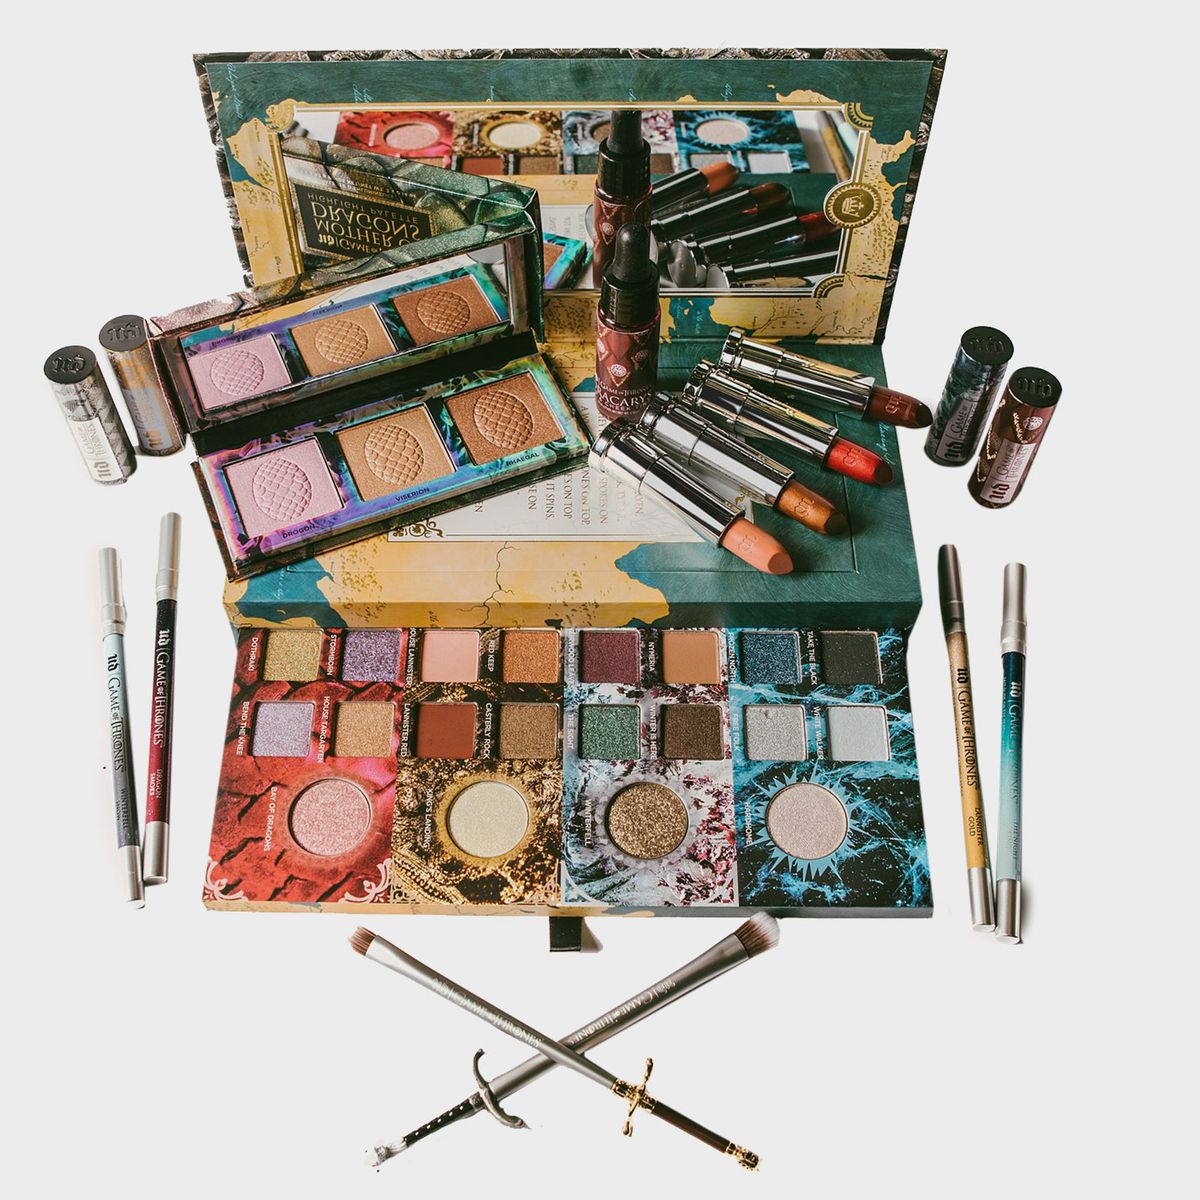 Game of Thrones Urban Decay Makeup Sale 2019 | The Strategist